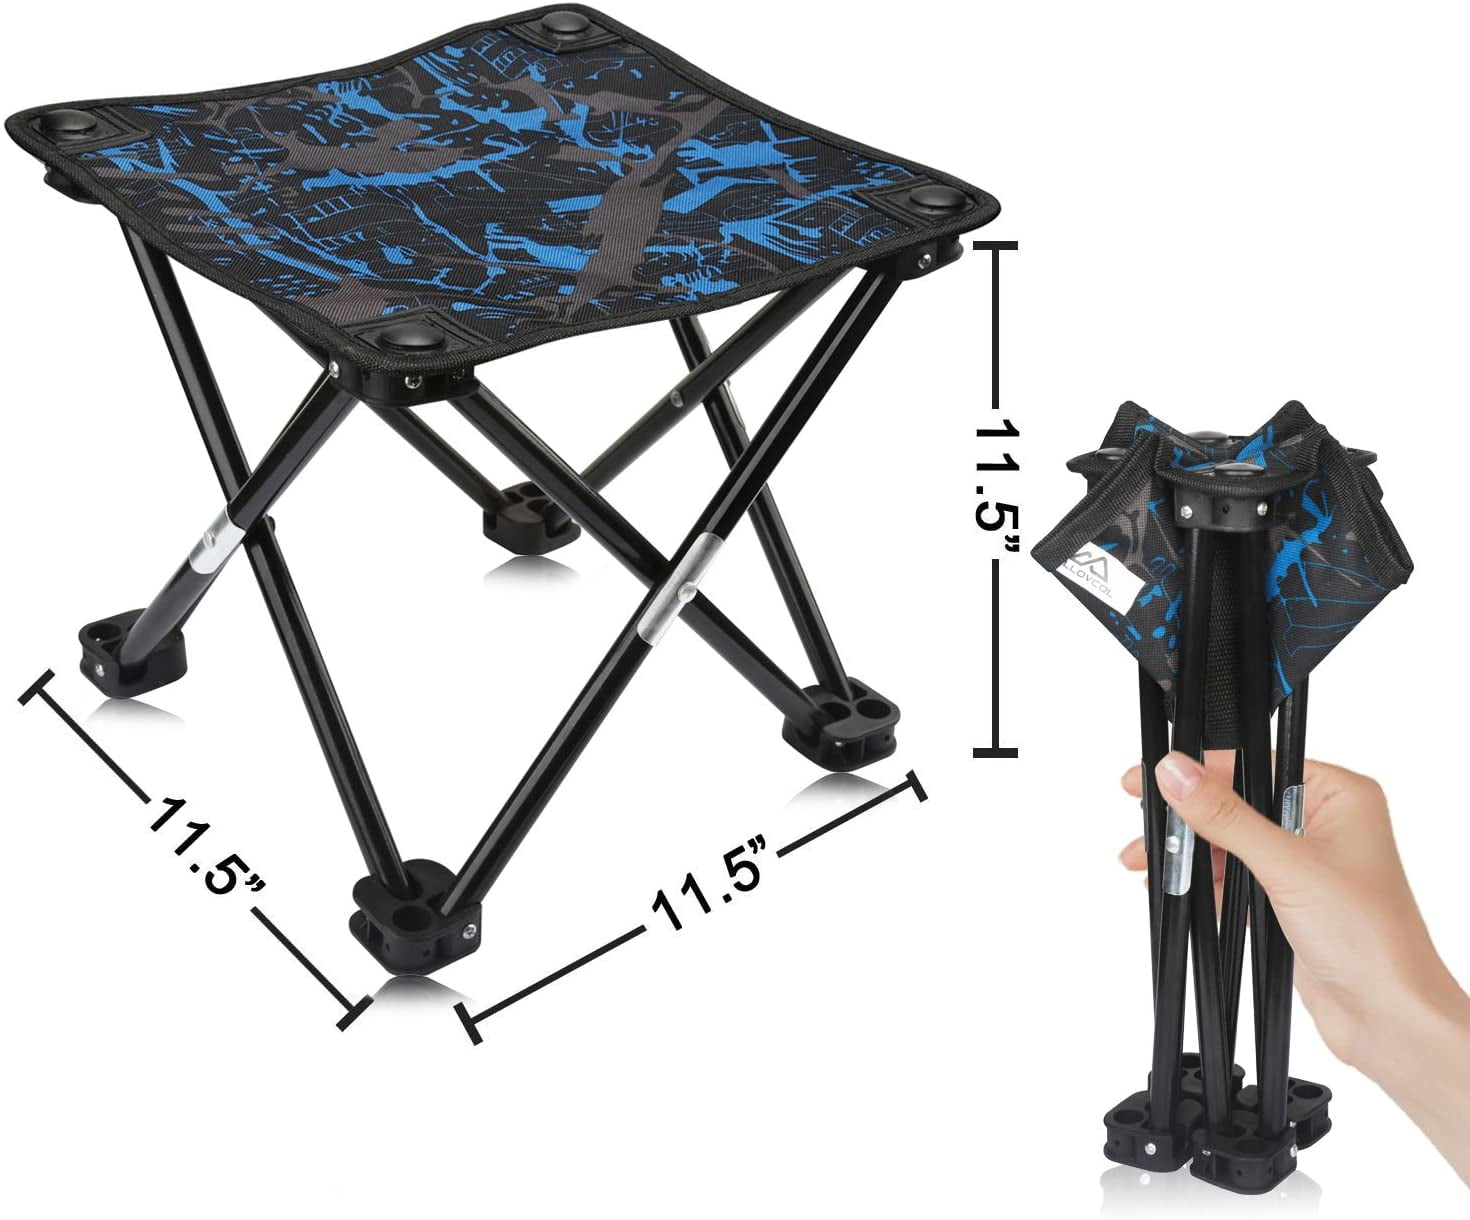 Folding Stool Portable Lightweight Folding Stool for Fishing Camping Home Bathroom Garden Portable Foldable Chair 